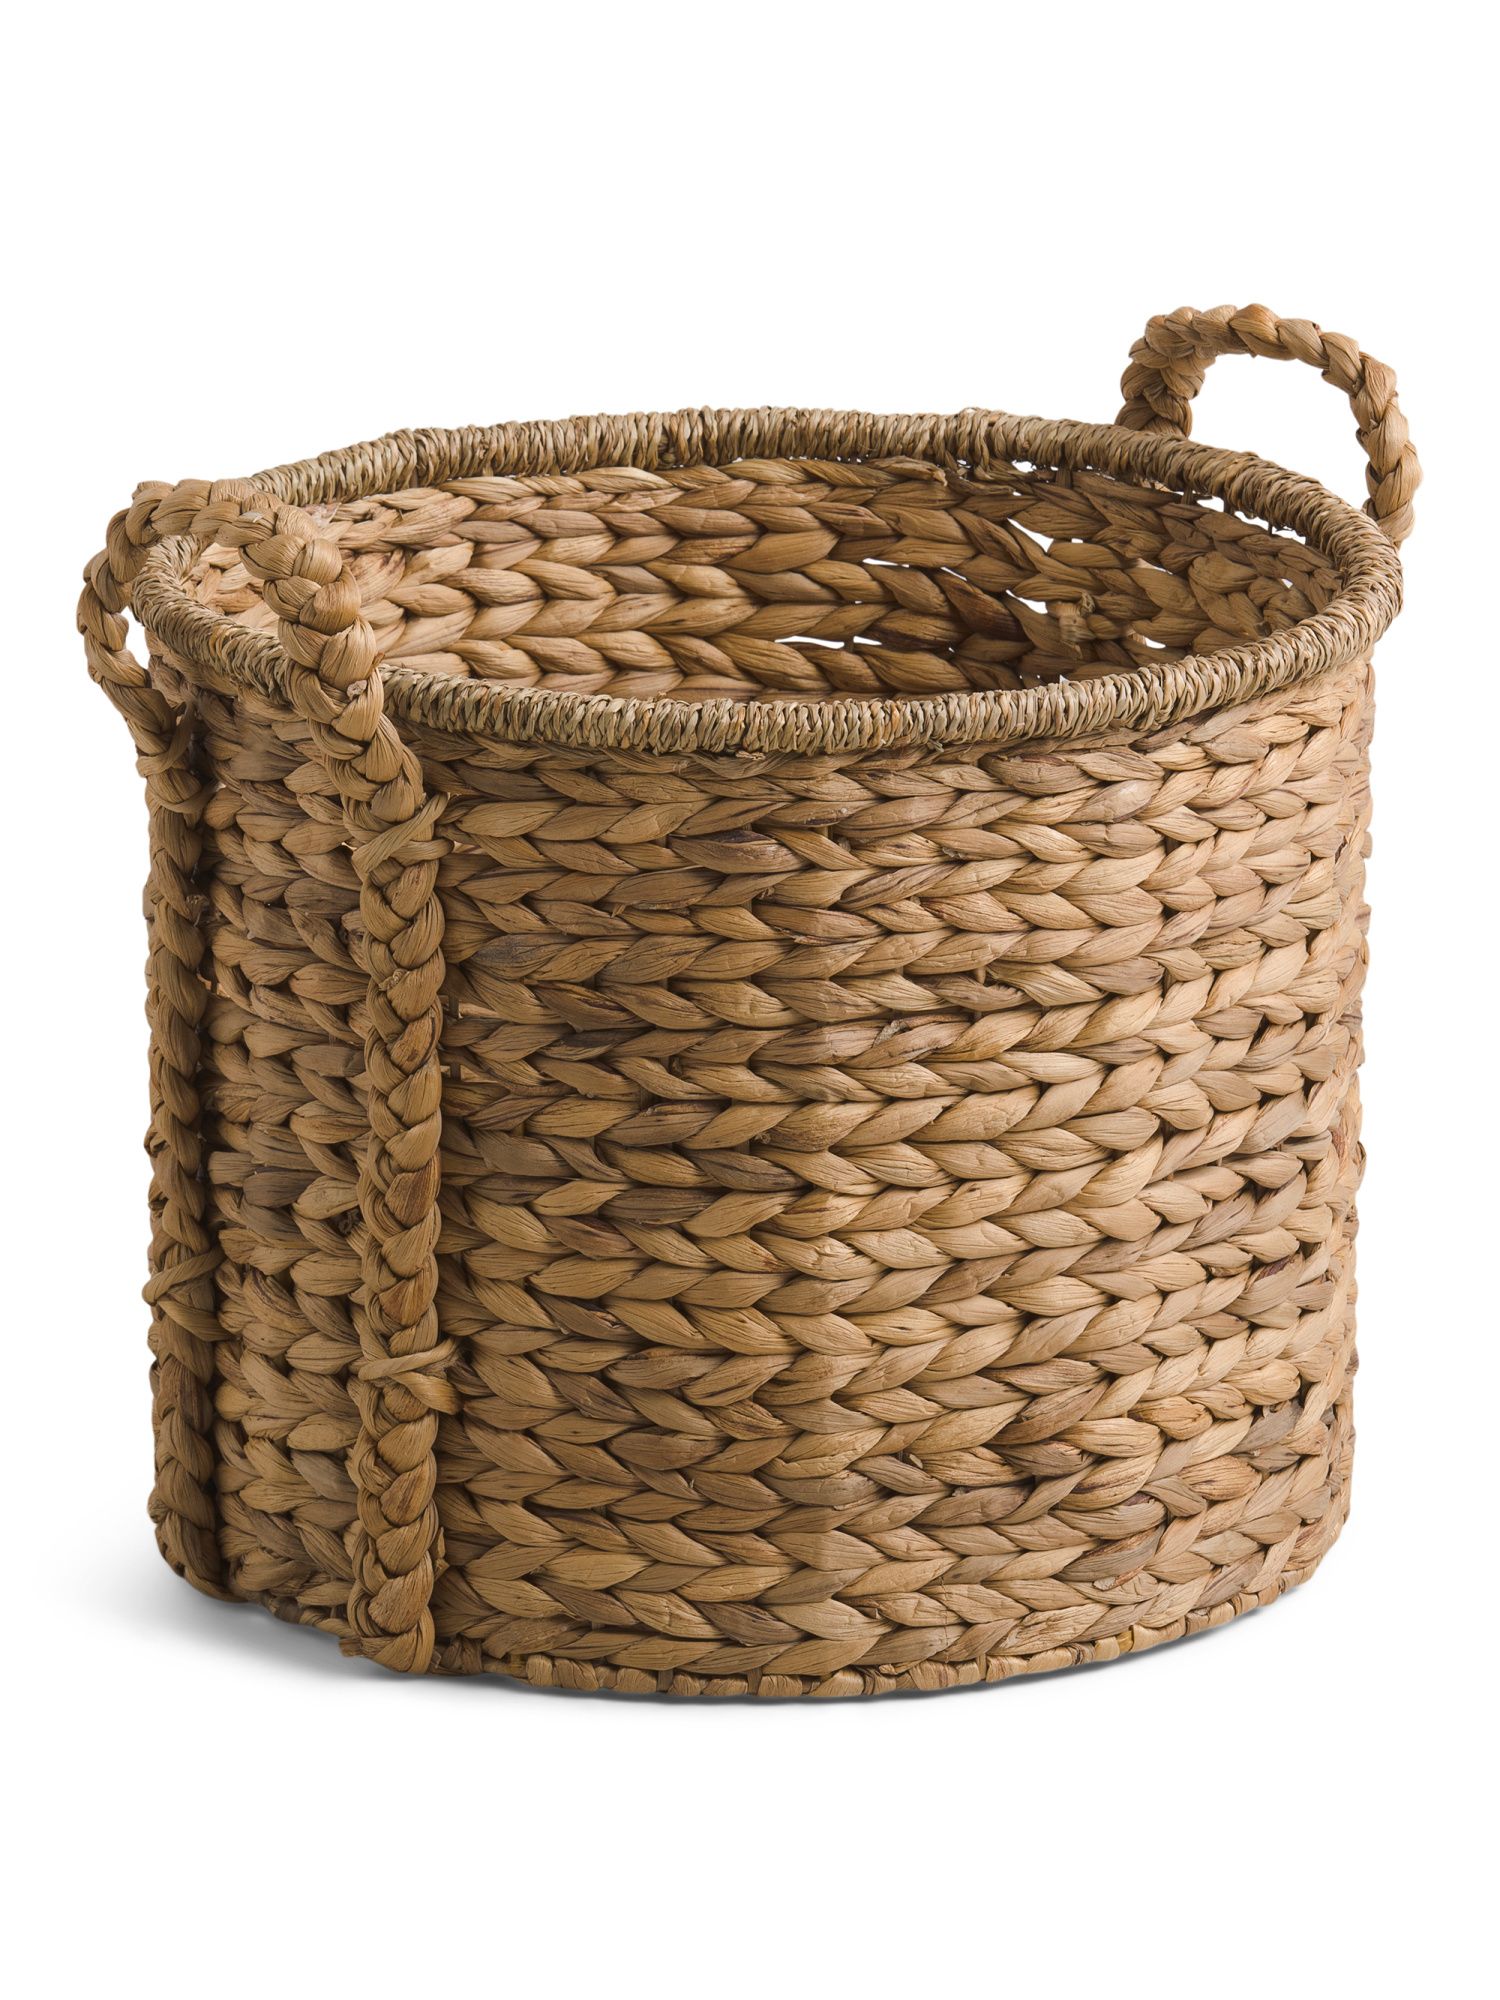 Large Natural Storage Basket With Braided Handles | TJ Maxx